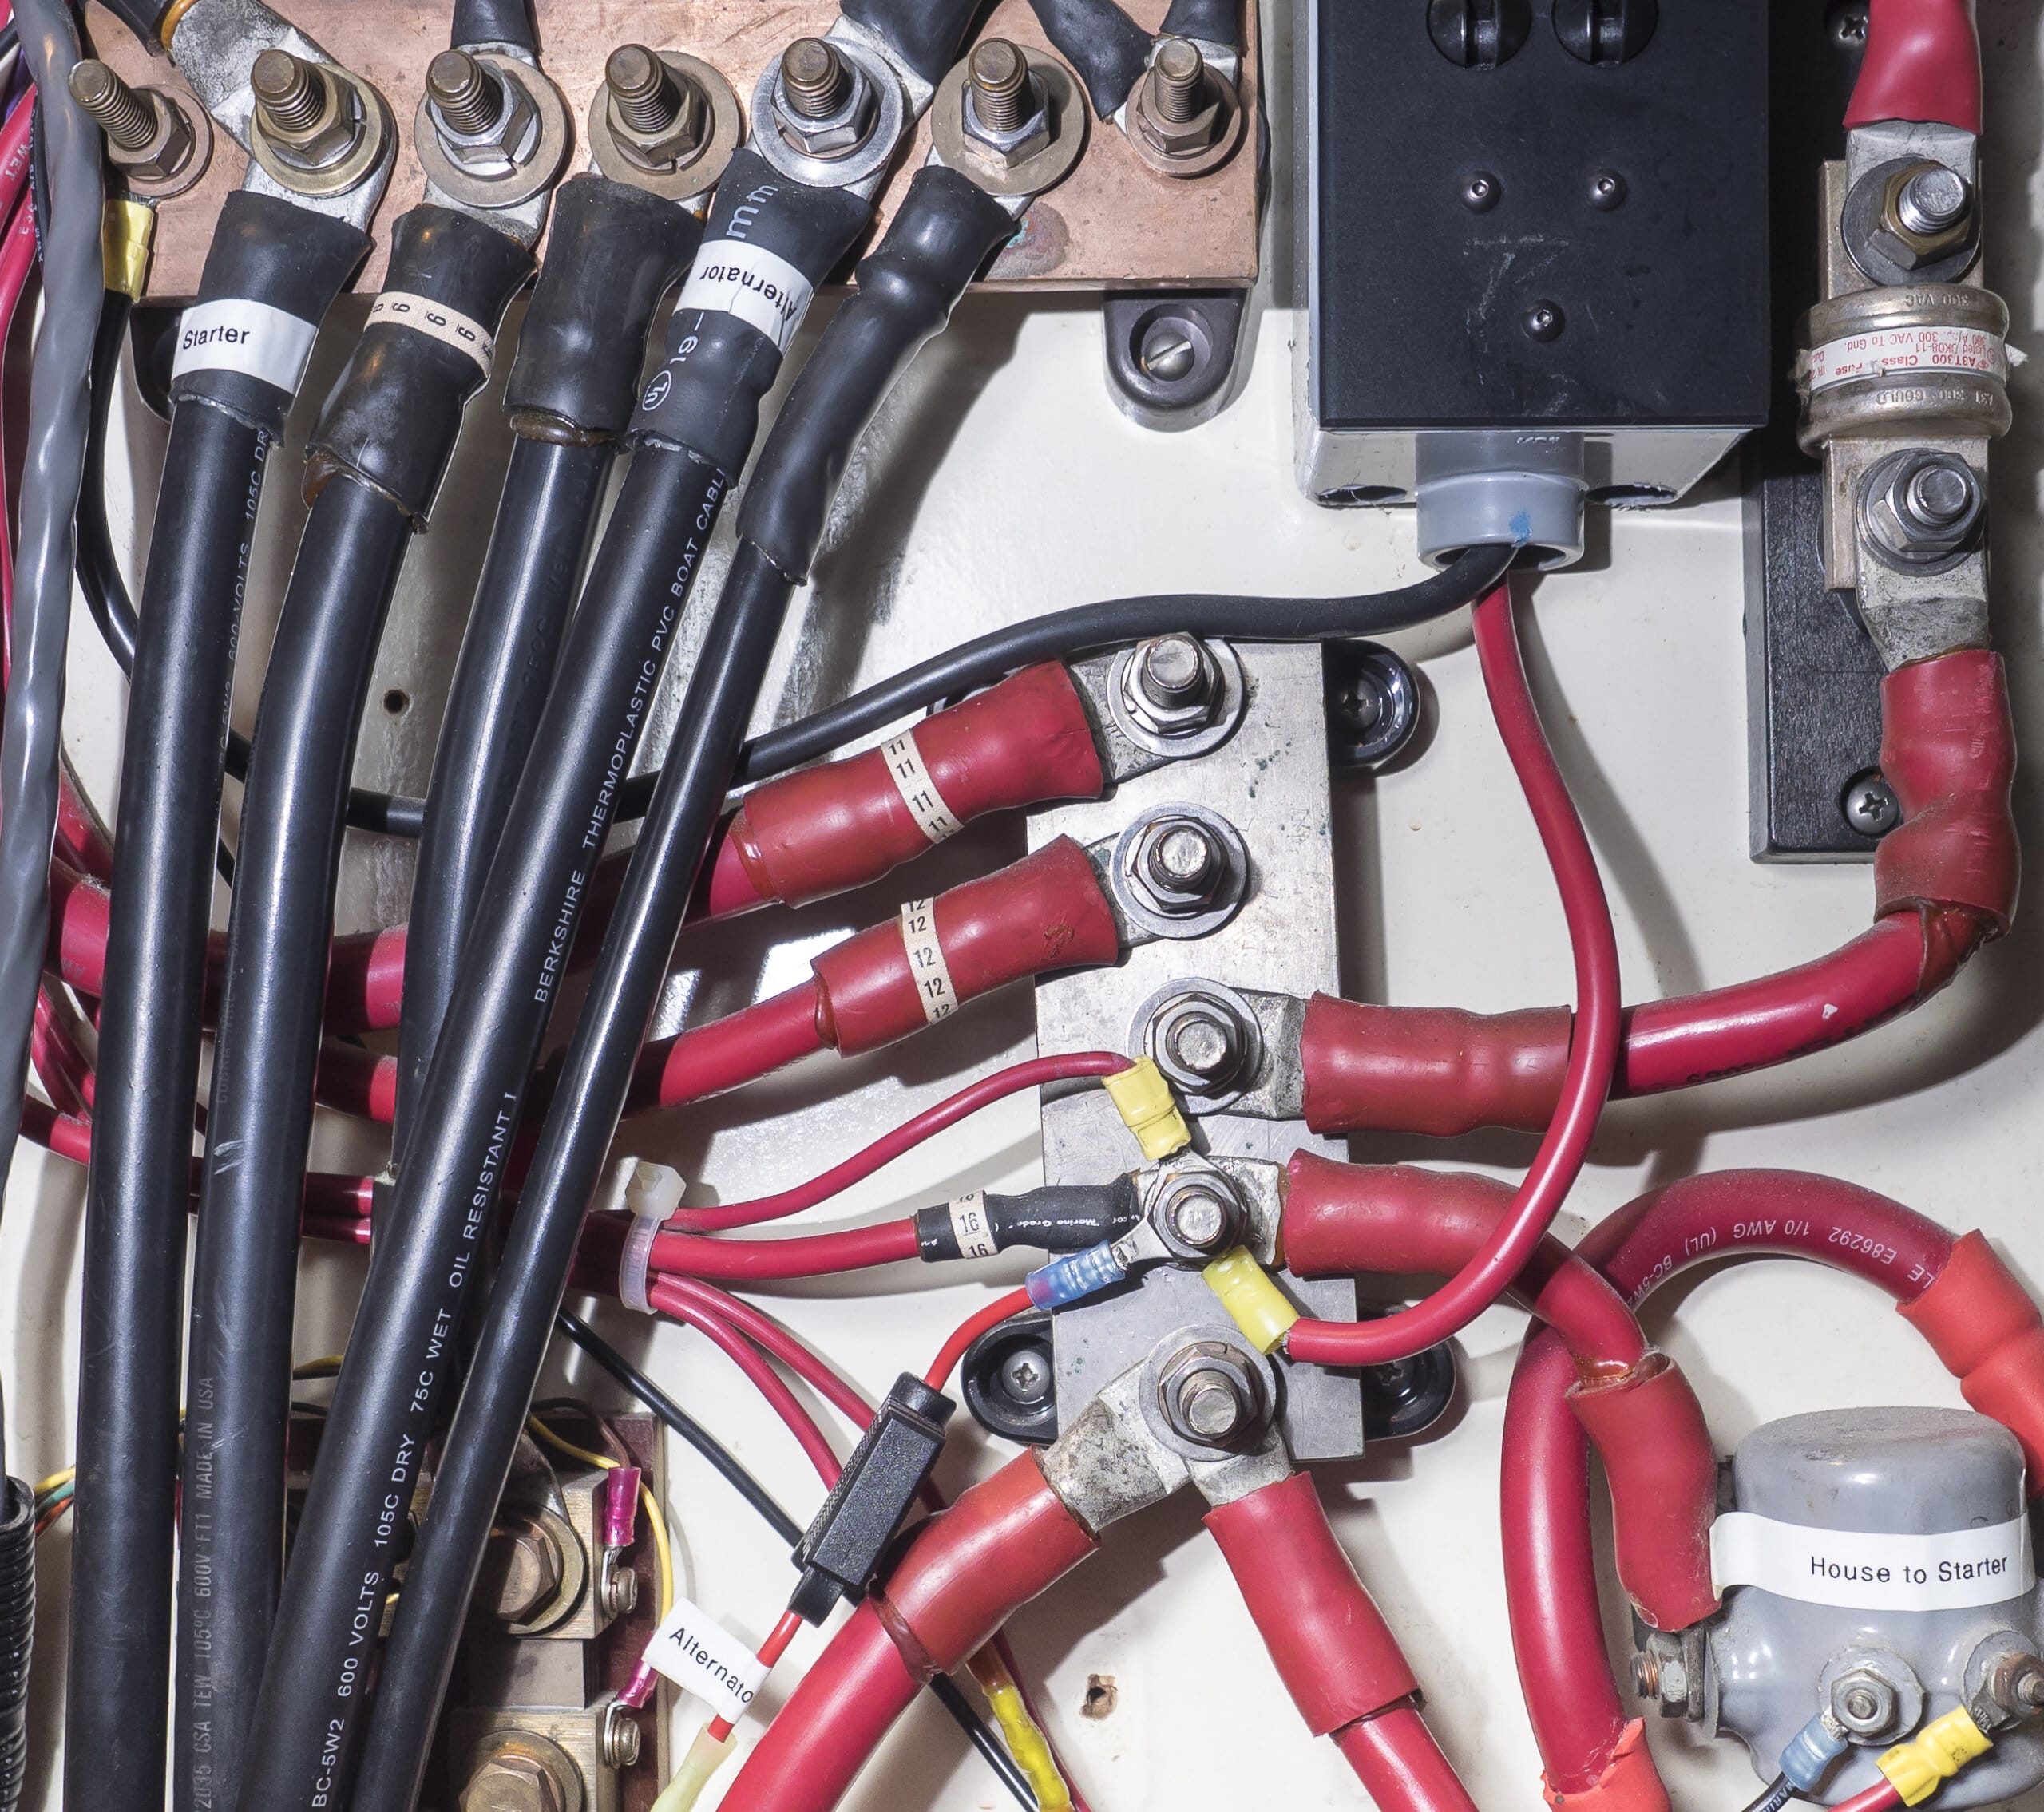 Should Your Boat’s DC Electrical System Be 12 or 24 Volt?—Part 1